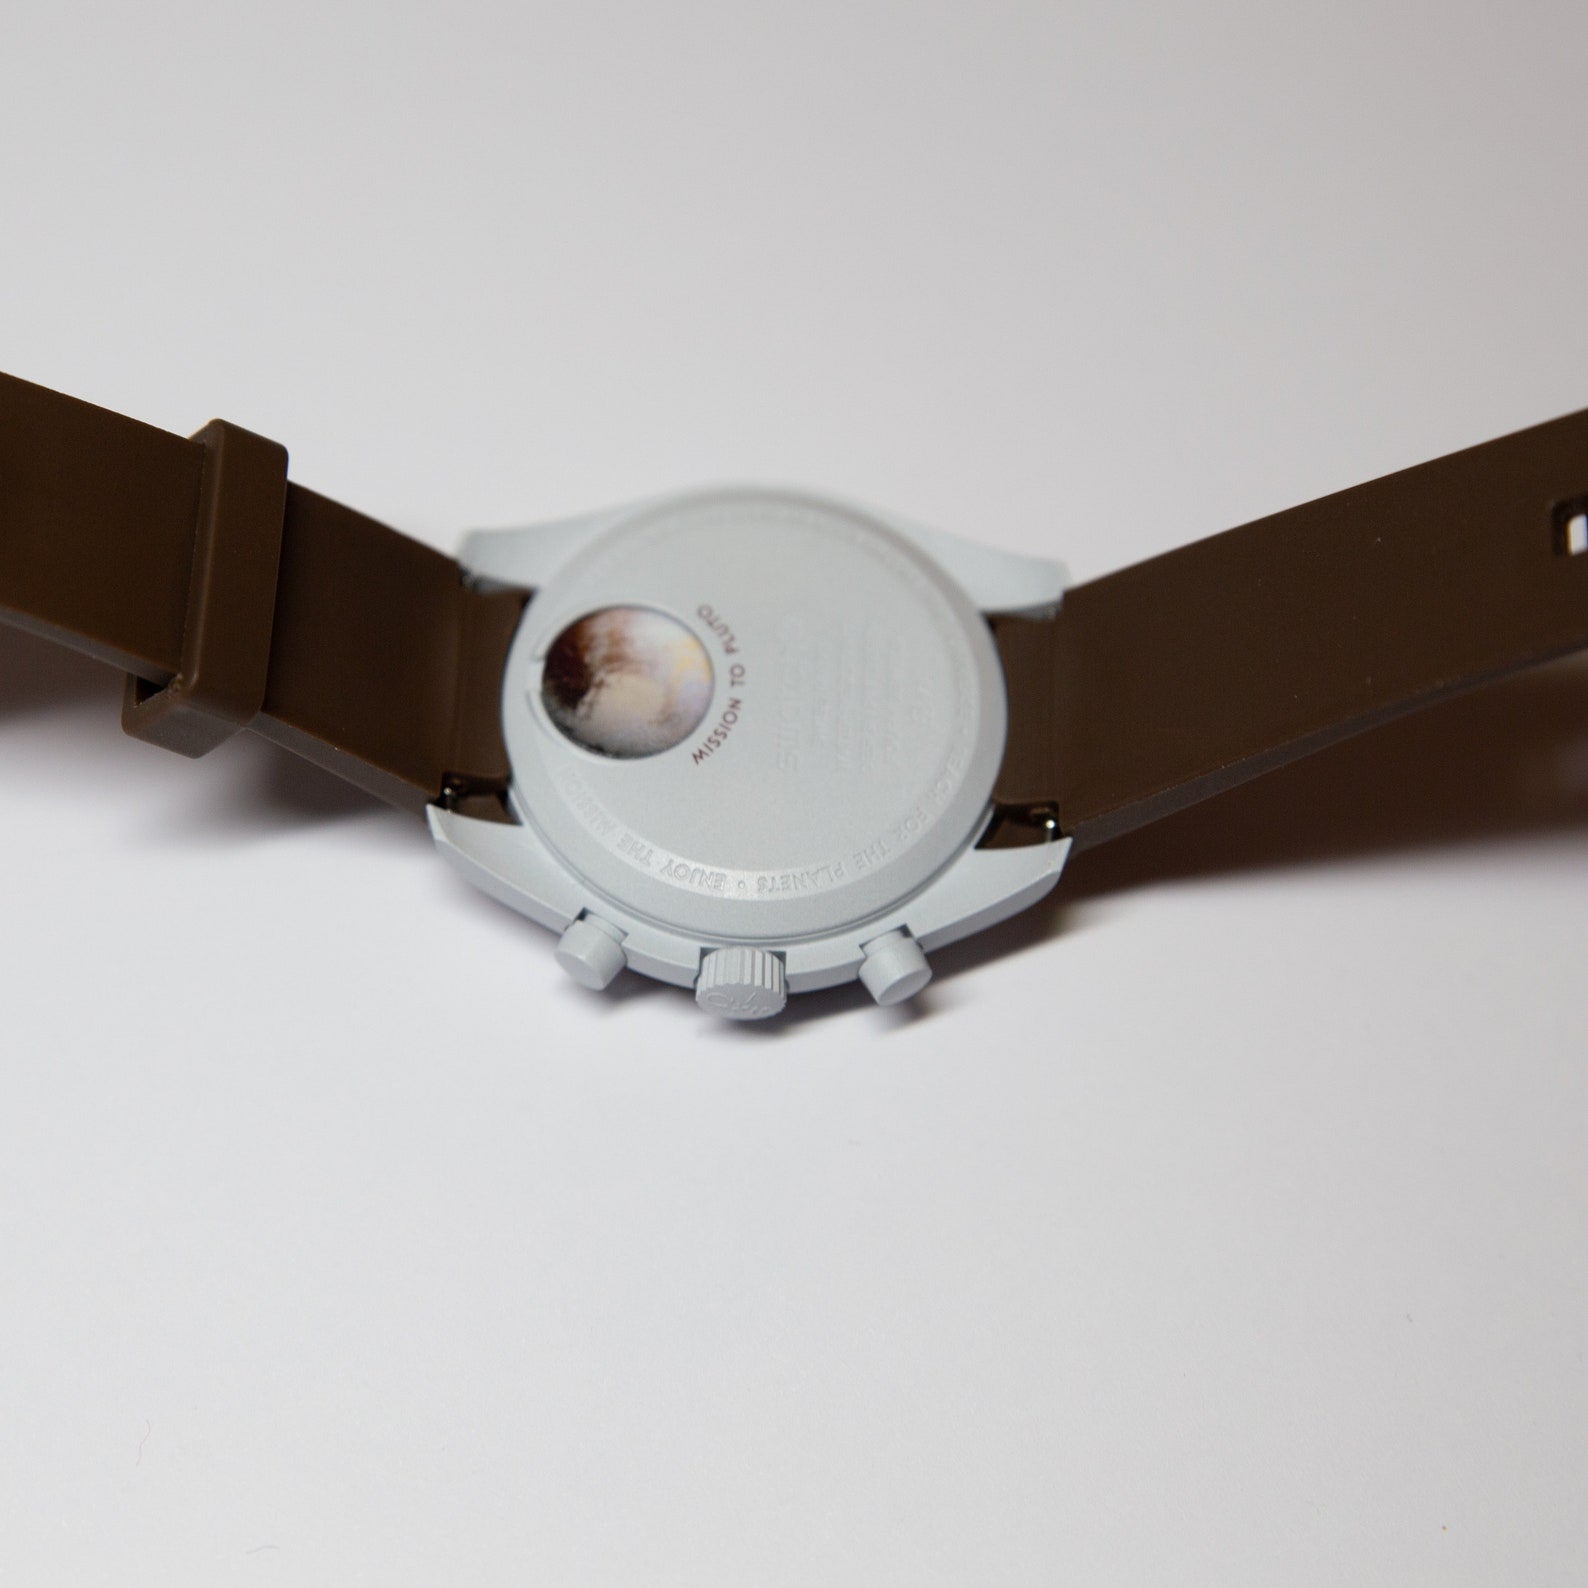 MoonSwatch Luxury Strap Brown "White Accent"